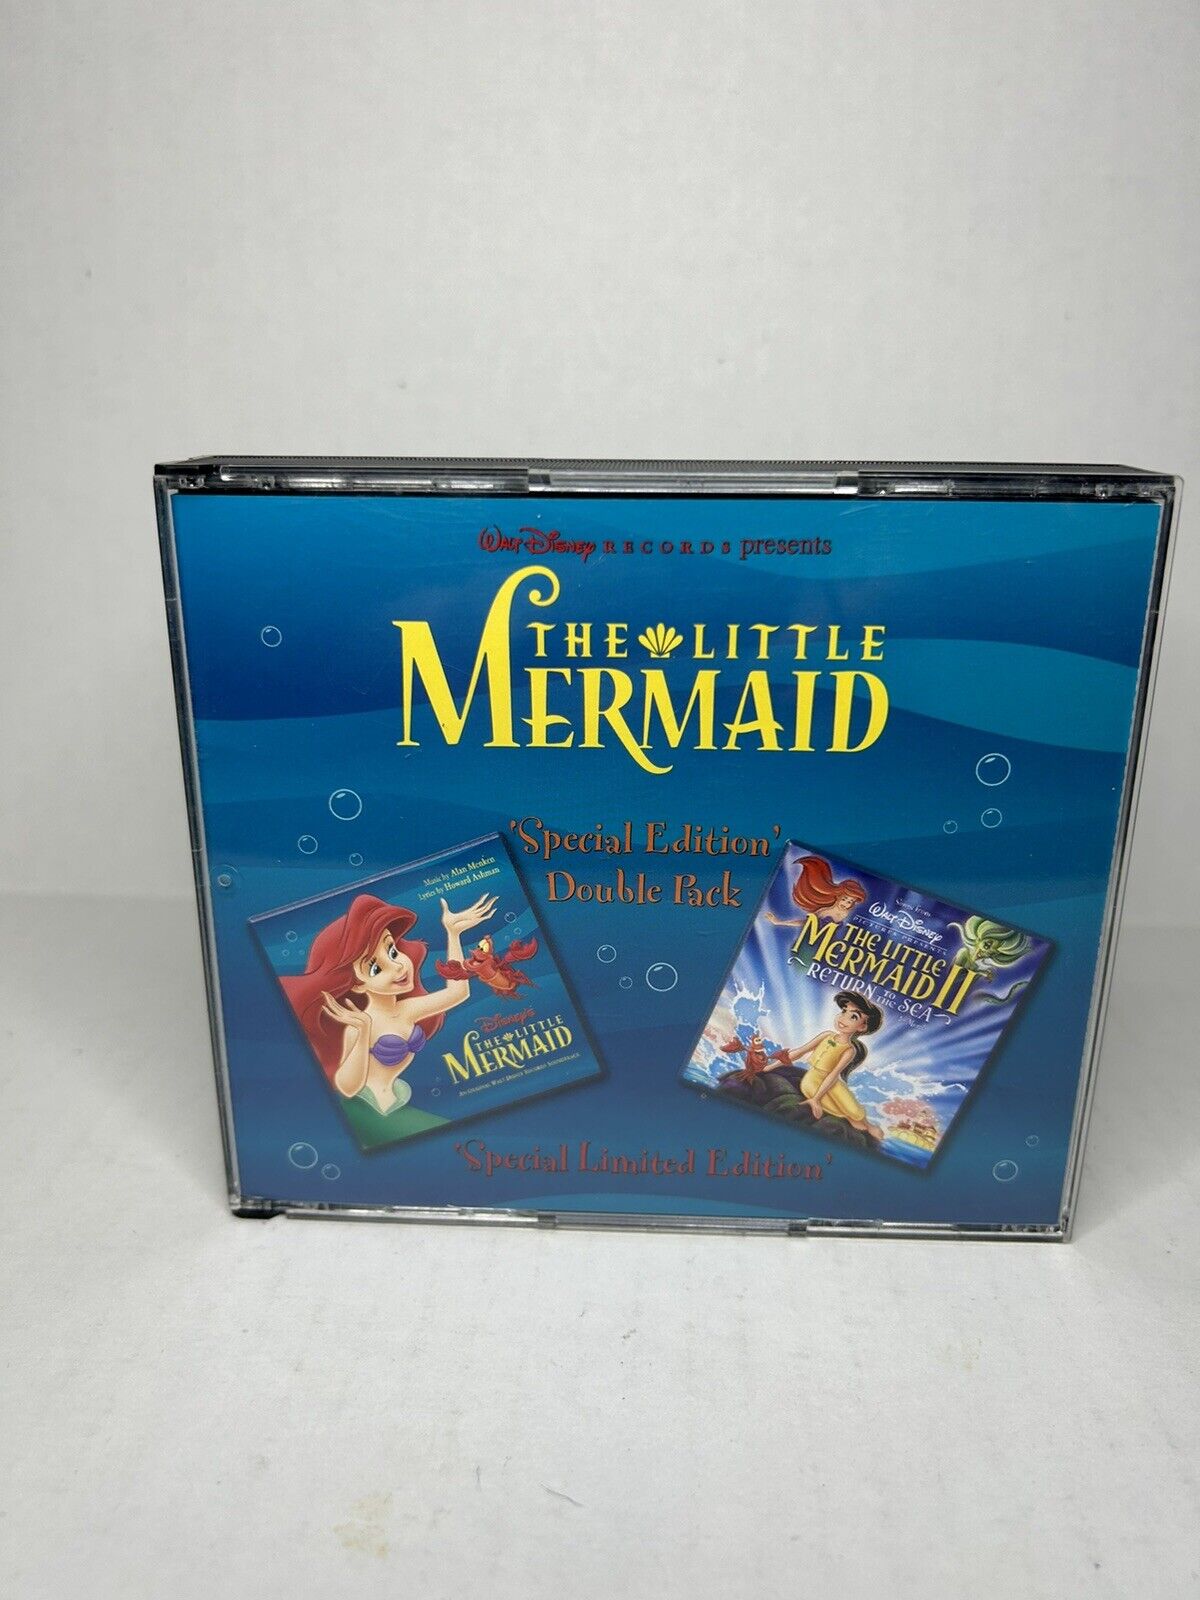 Little Mermaid Special Edition Double Pack CD - Music From Little Mermaid 1 & 2 